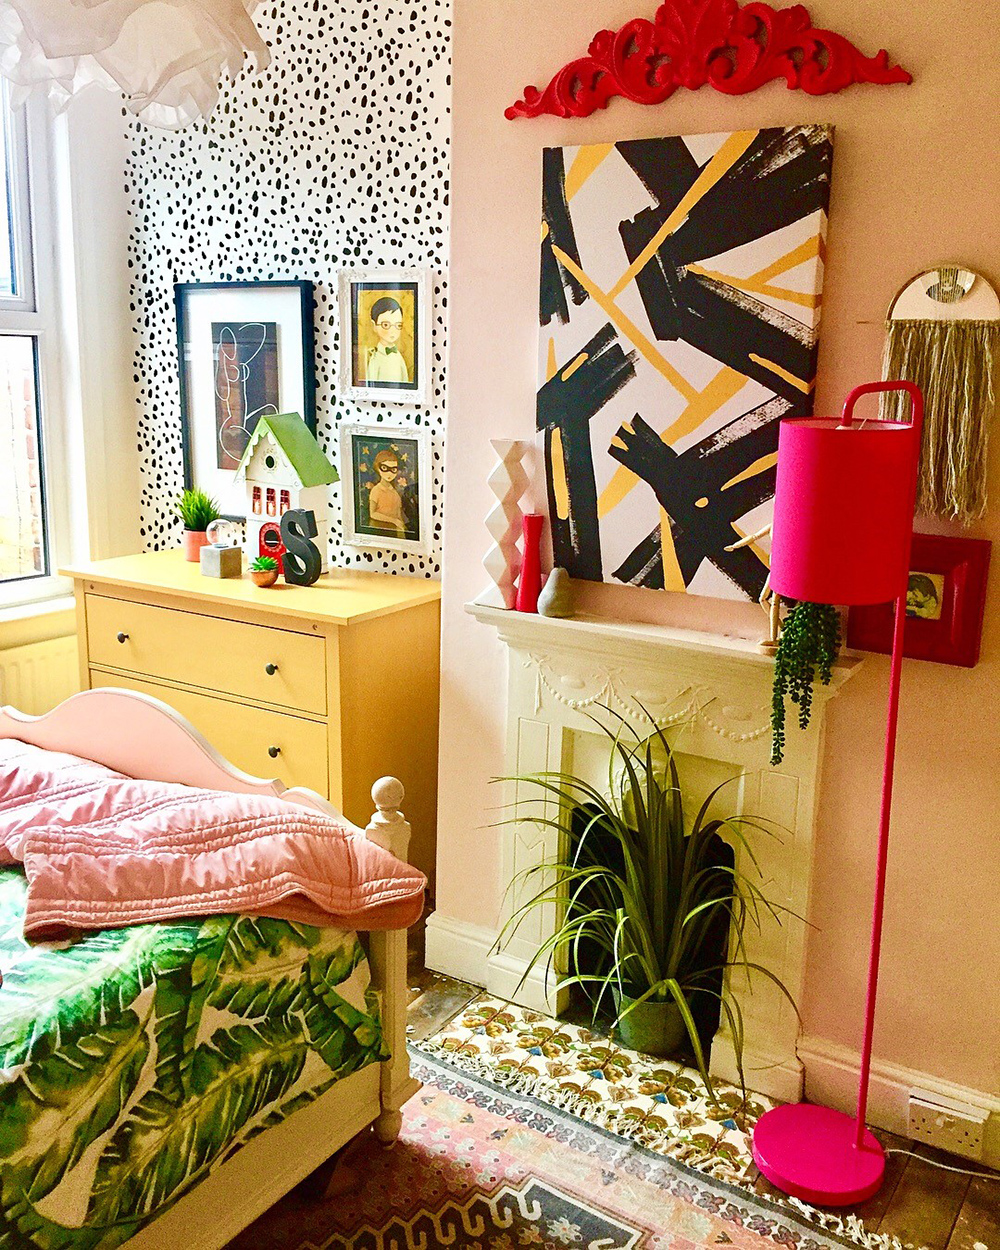 Colourful and fun bedroom with clashing patterns. 